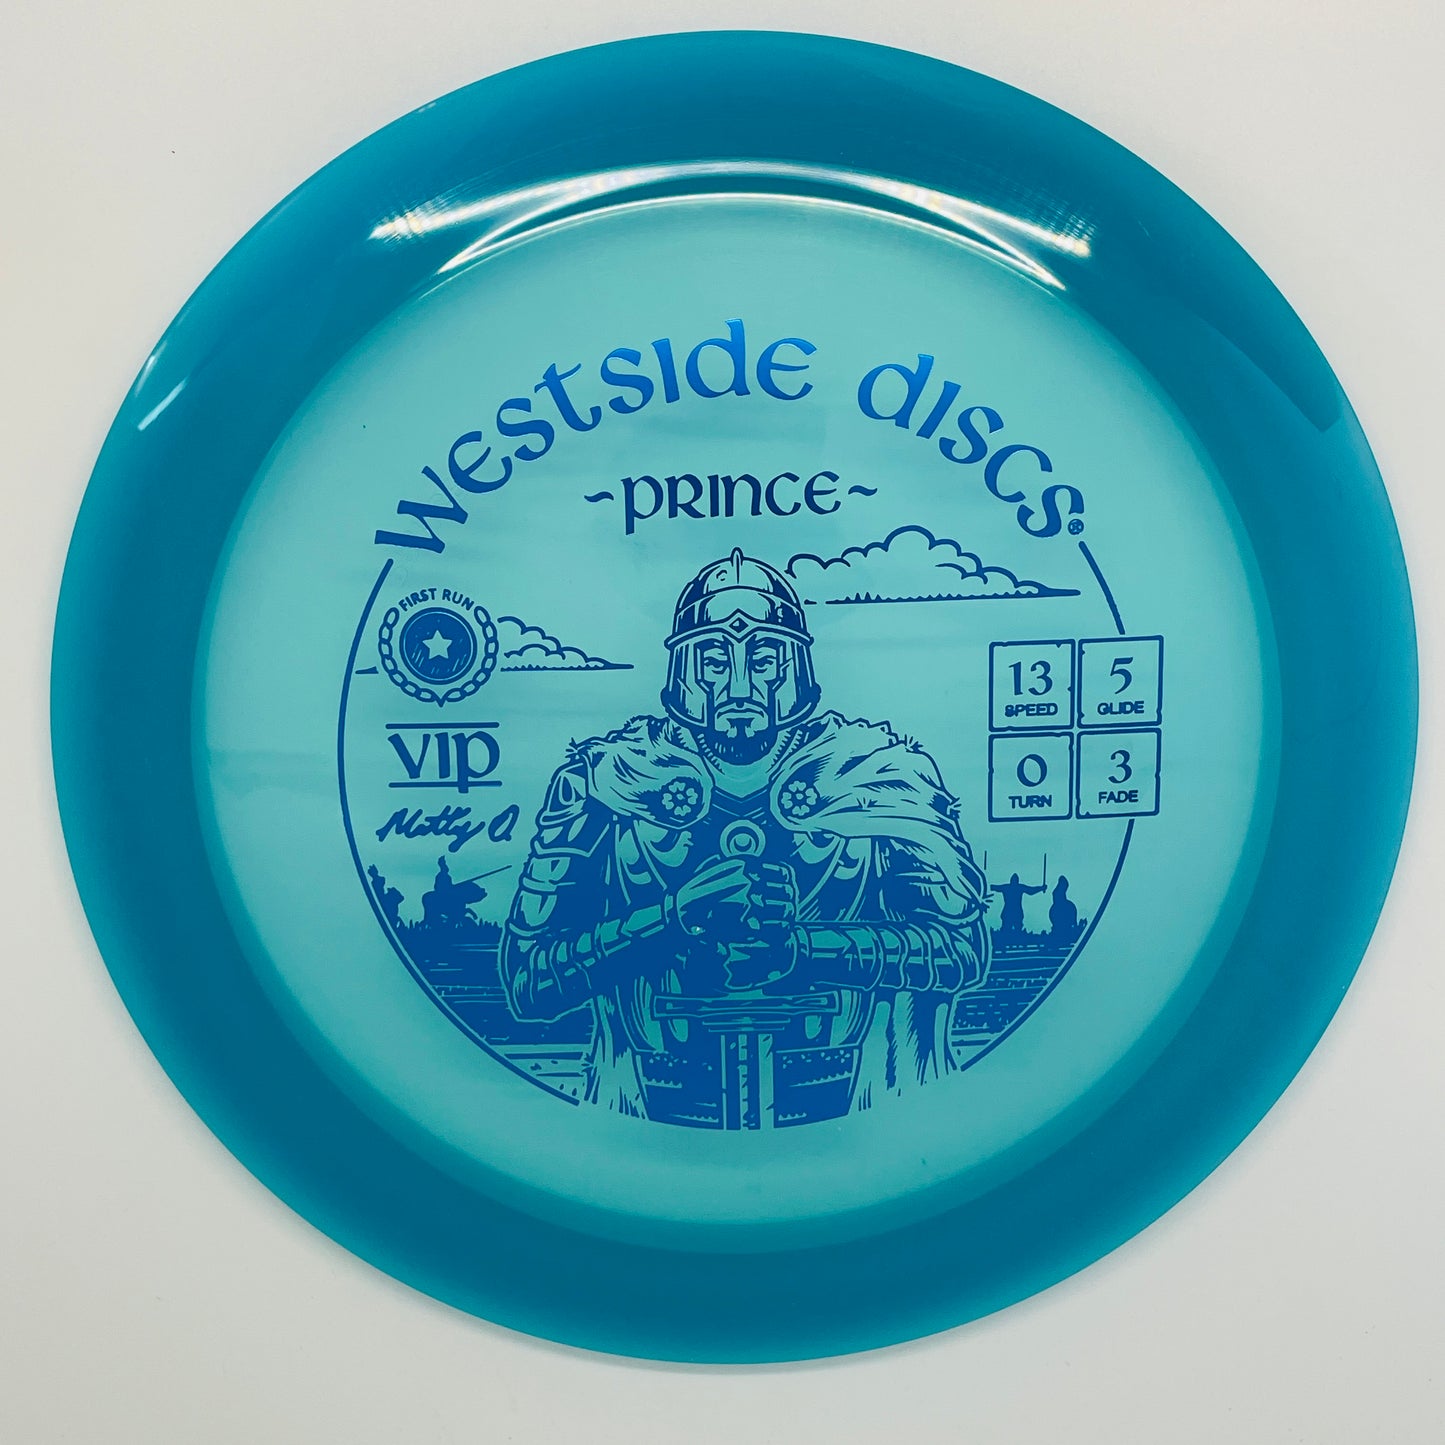 Westside Discs VIP First Run Prince - Distance Driver